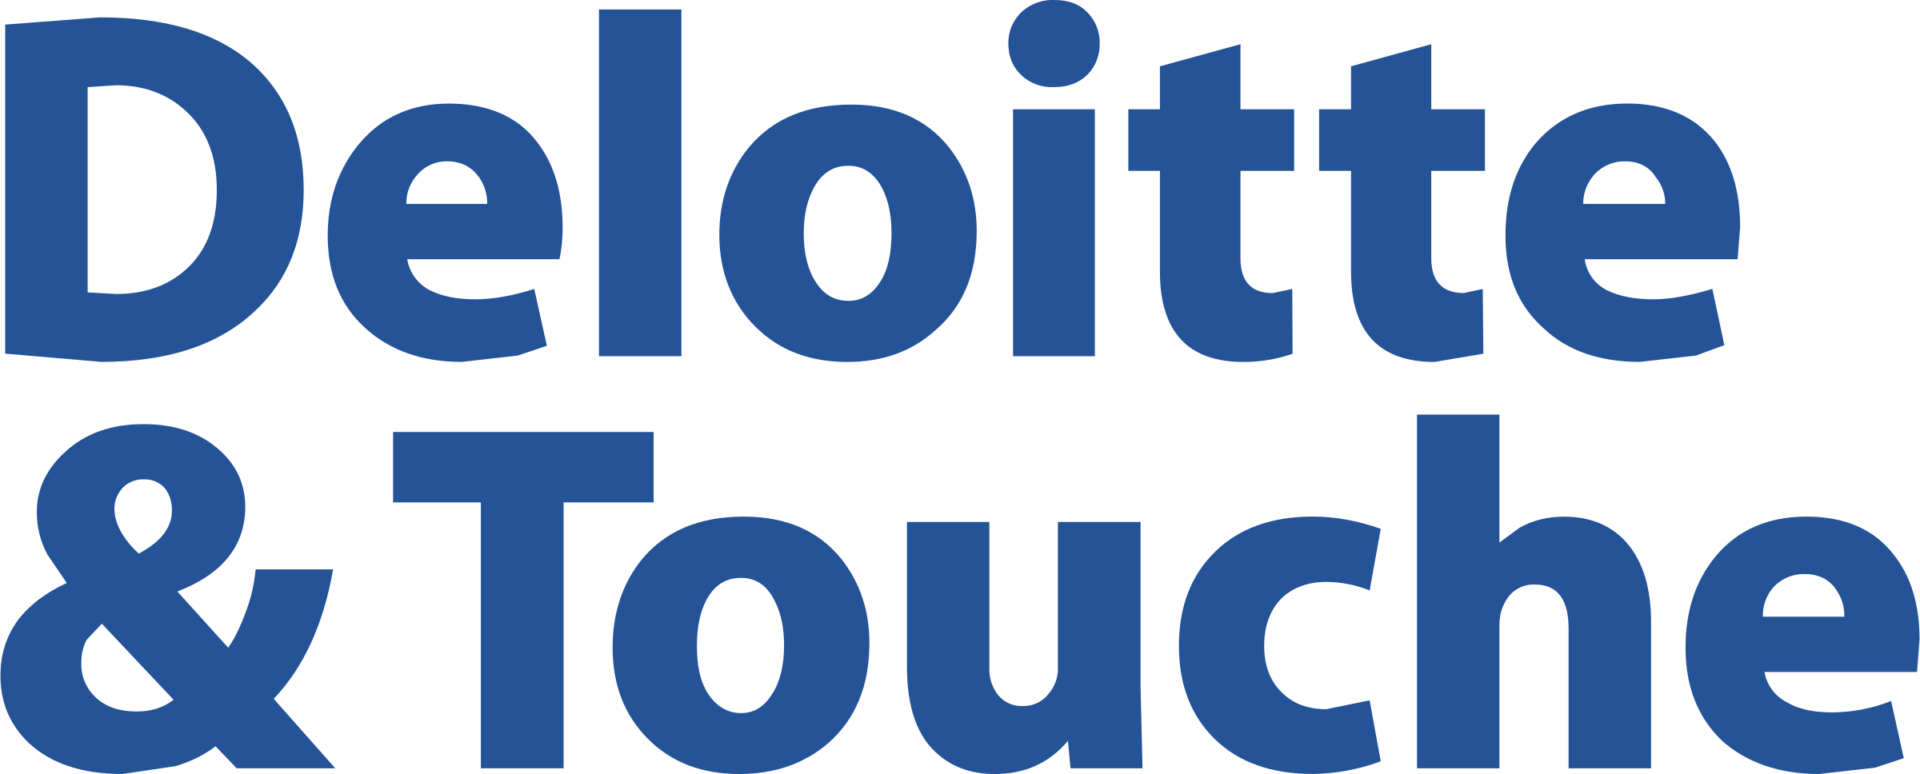 A green background with blue letters that say " iloit touch ".